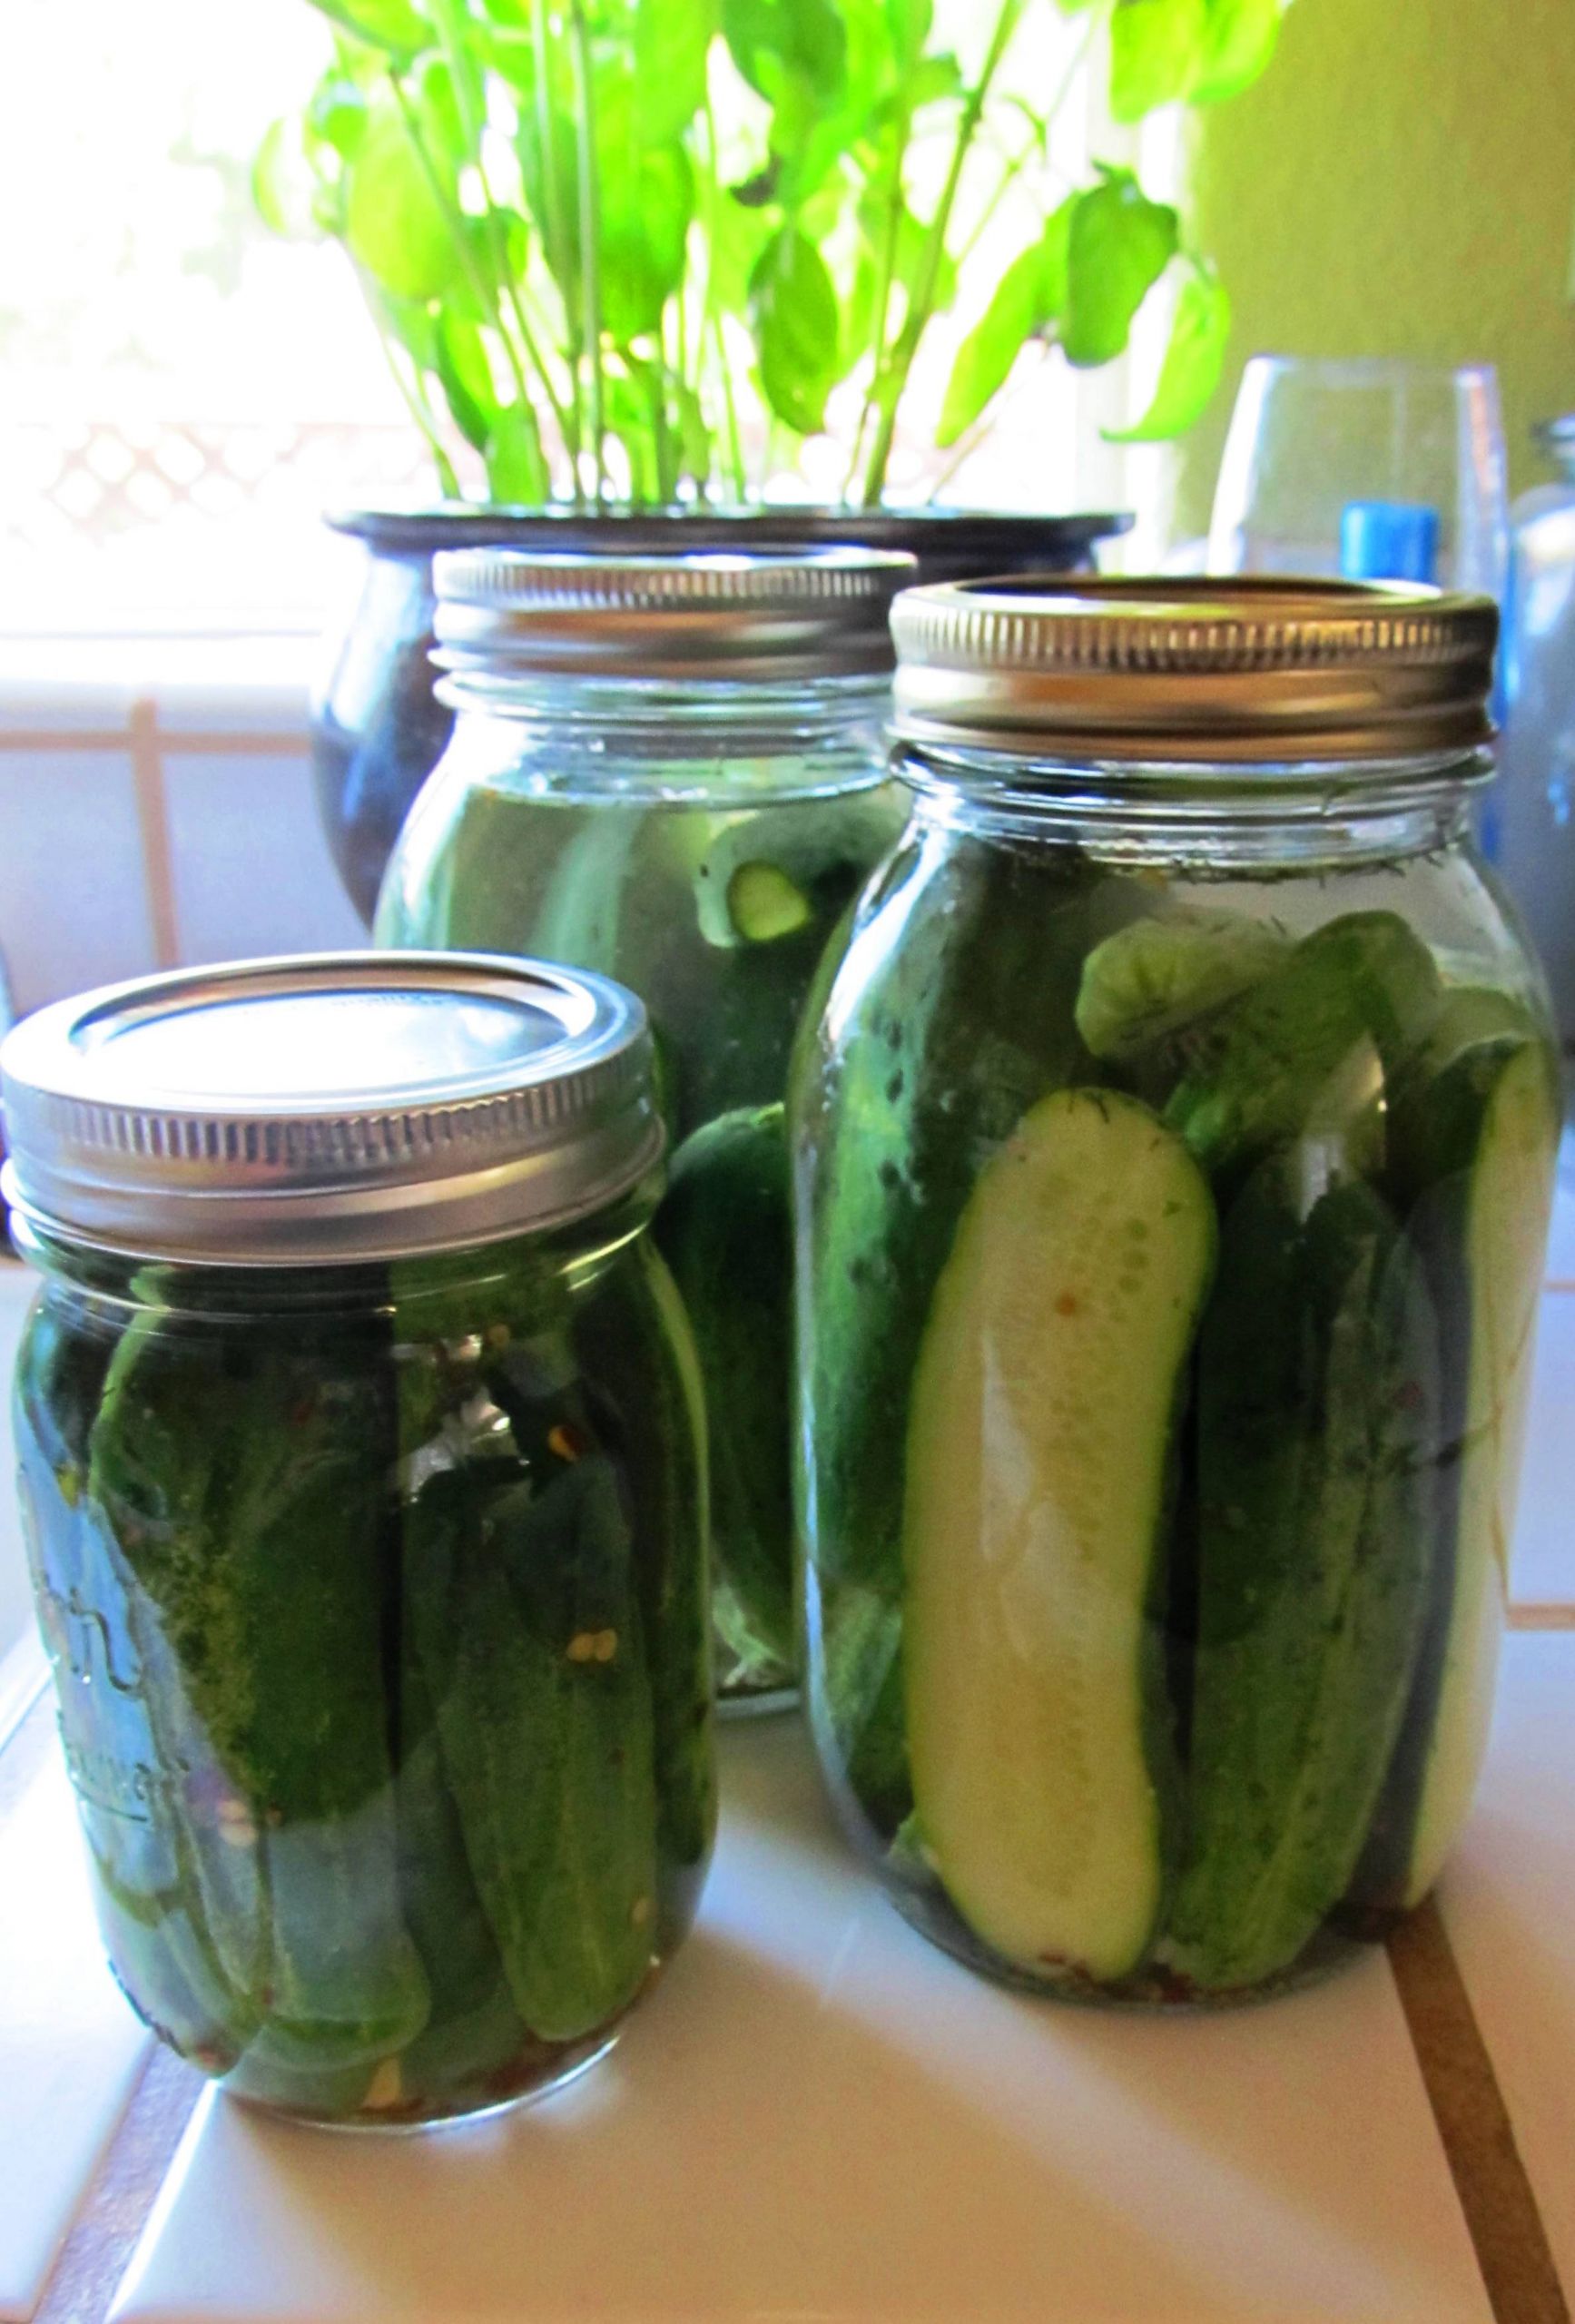 Dill Pickles Recipe For Canning
 Got Pickles Spicy Garlic Dill Pickles Refrigerator or